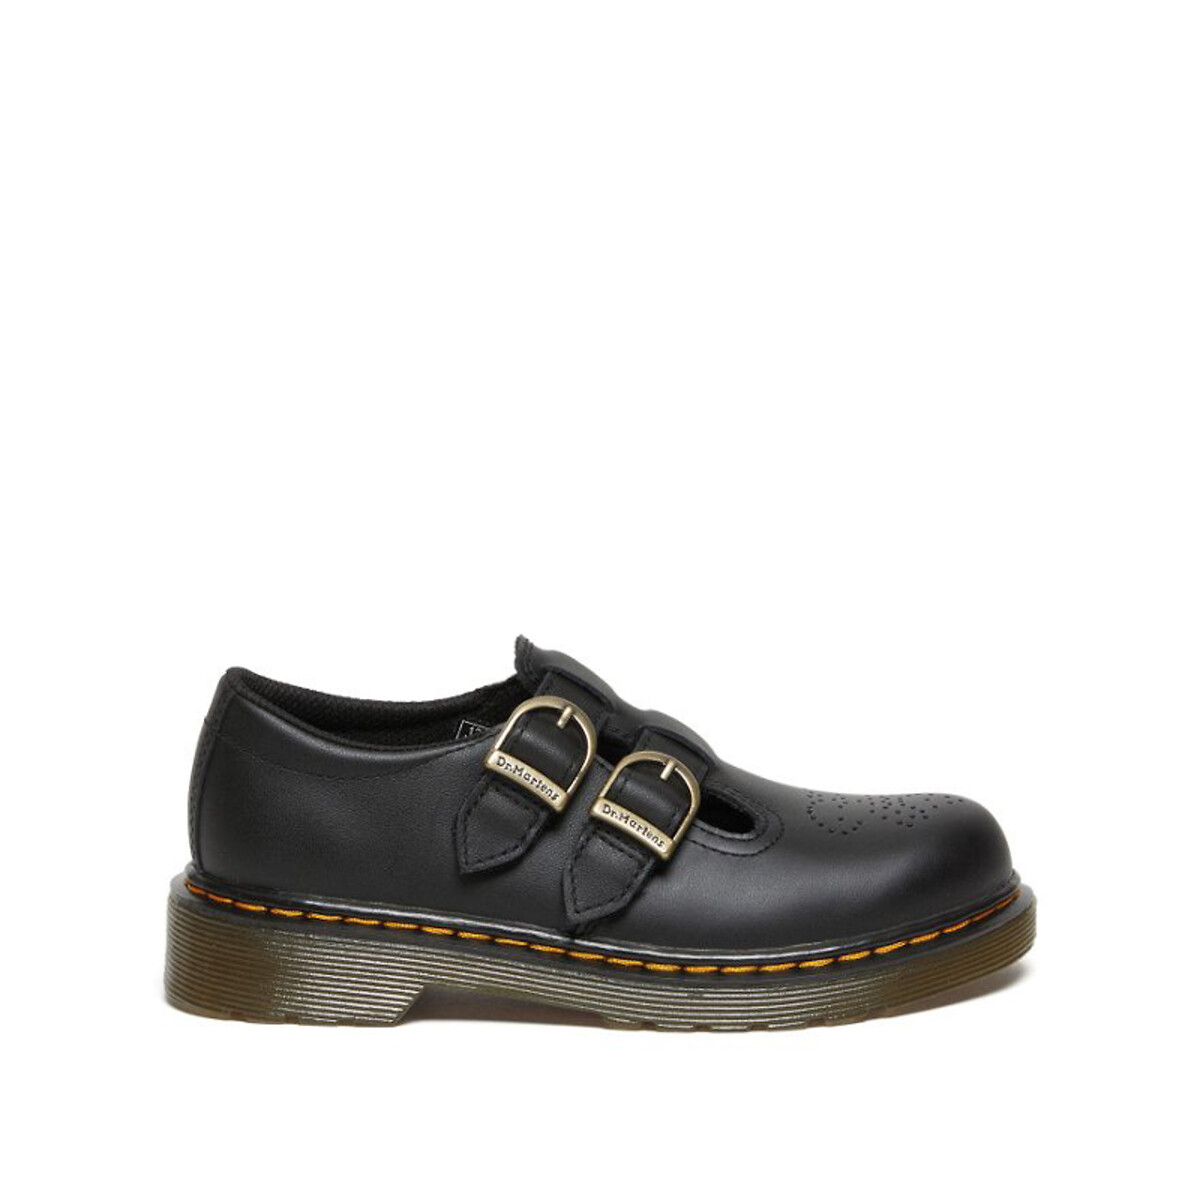 Image of Kids 8065 Mary Janes in Softy T Leather